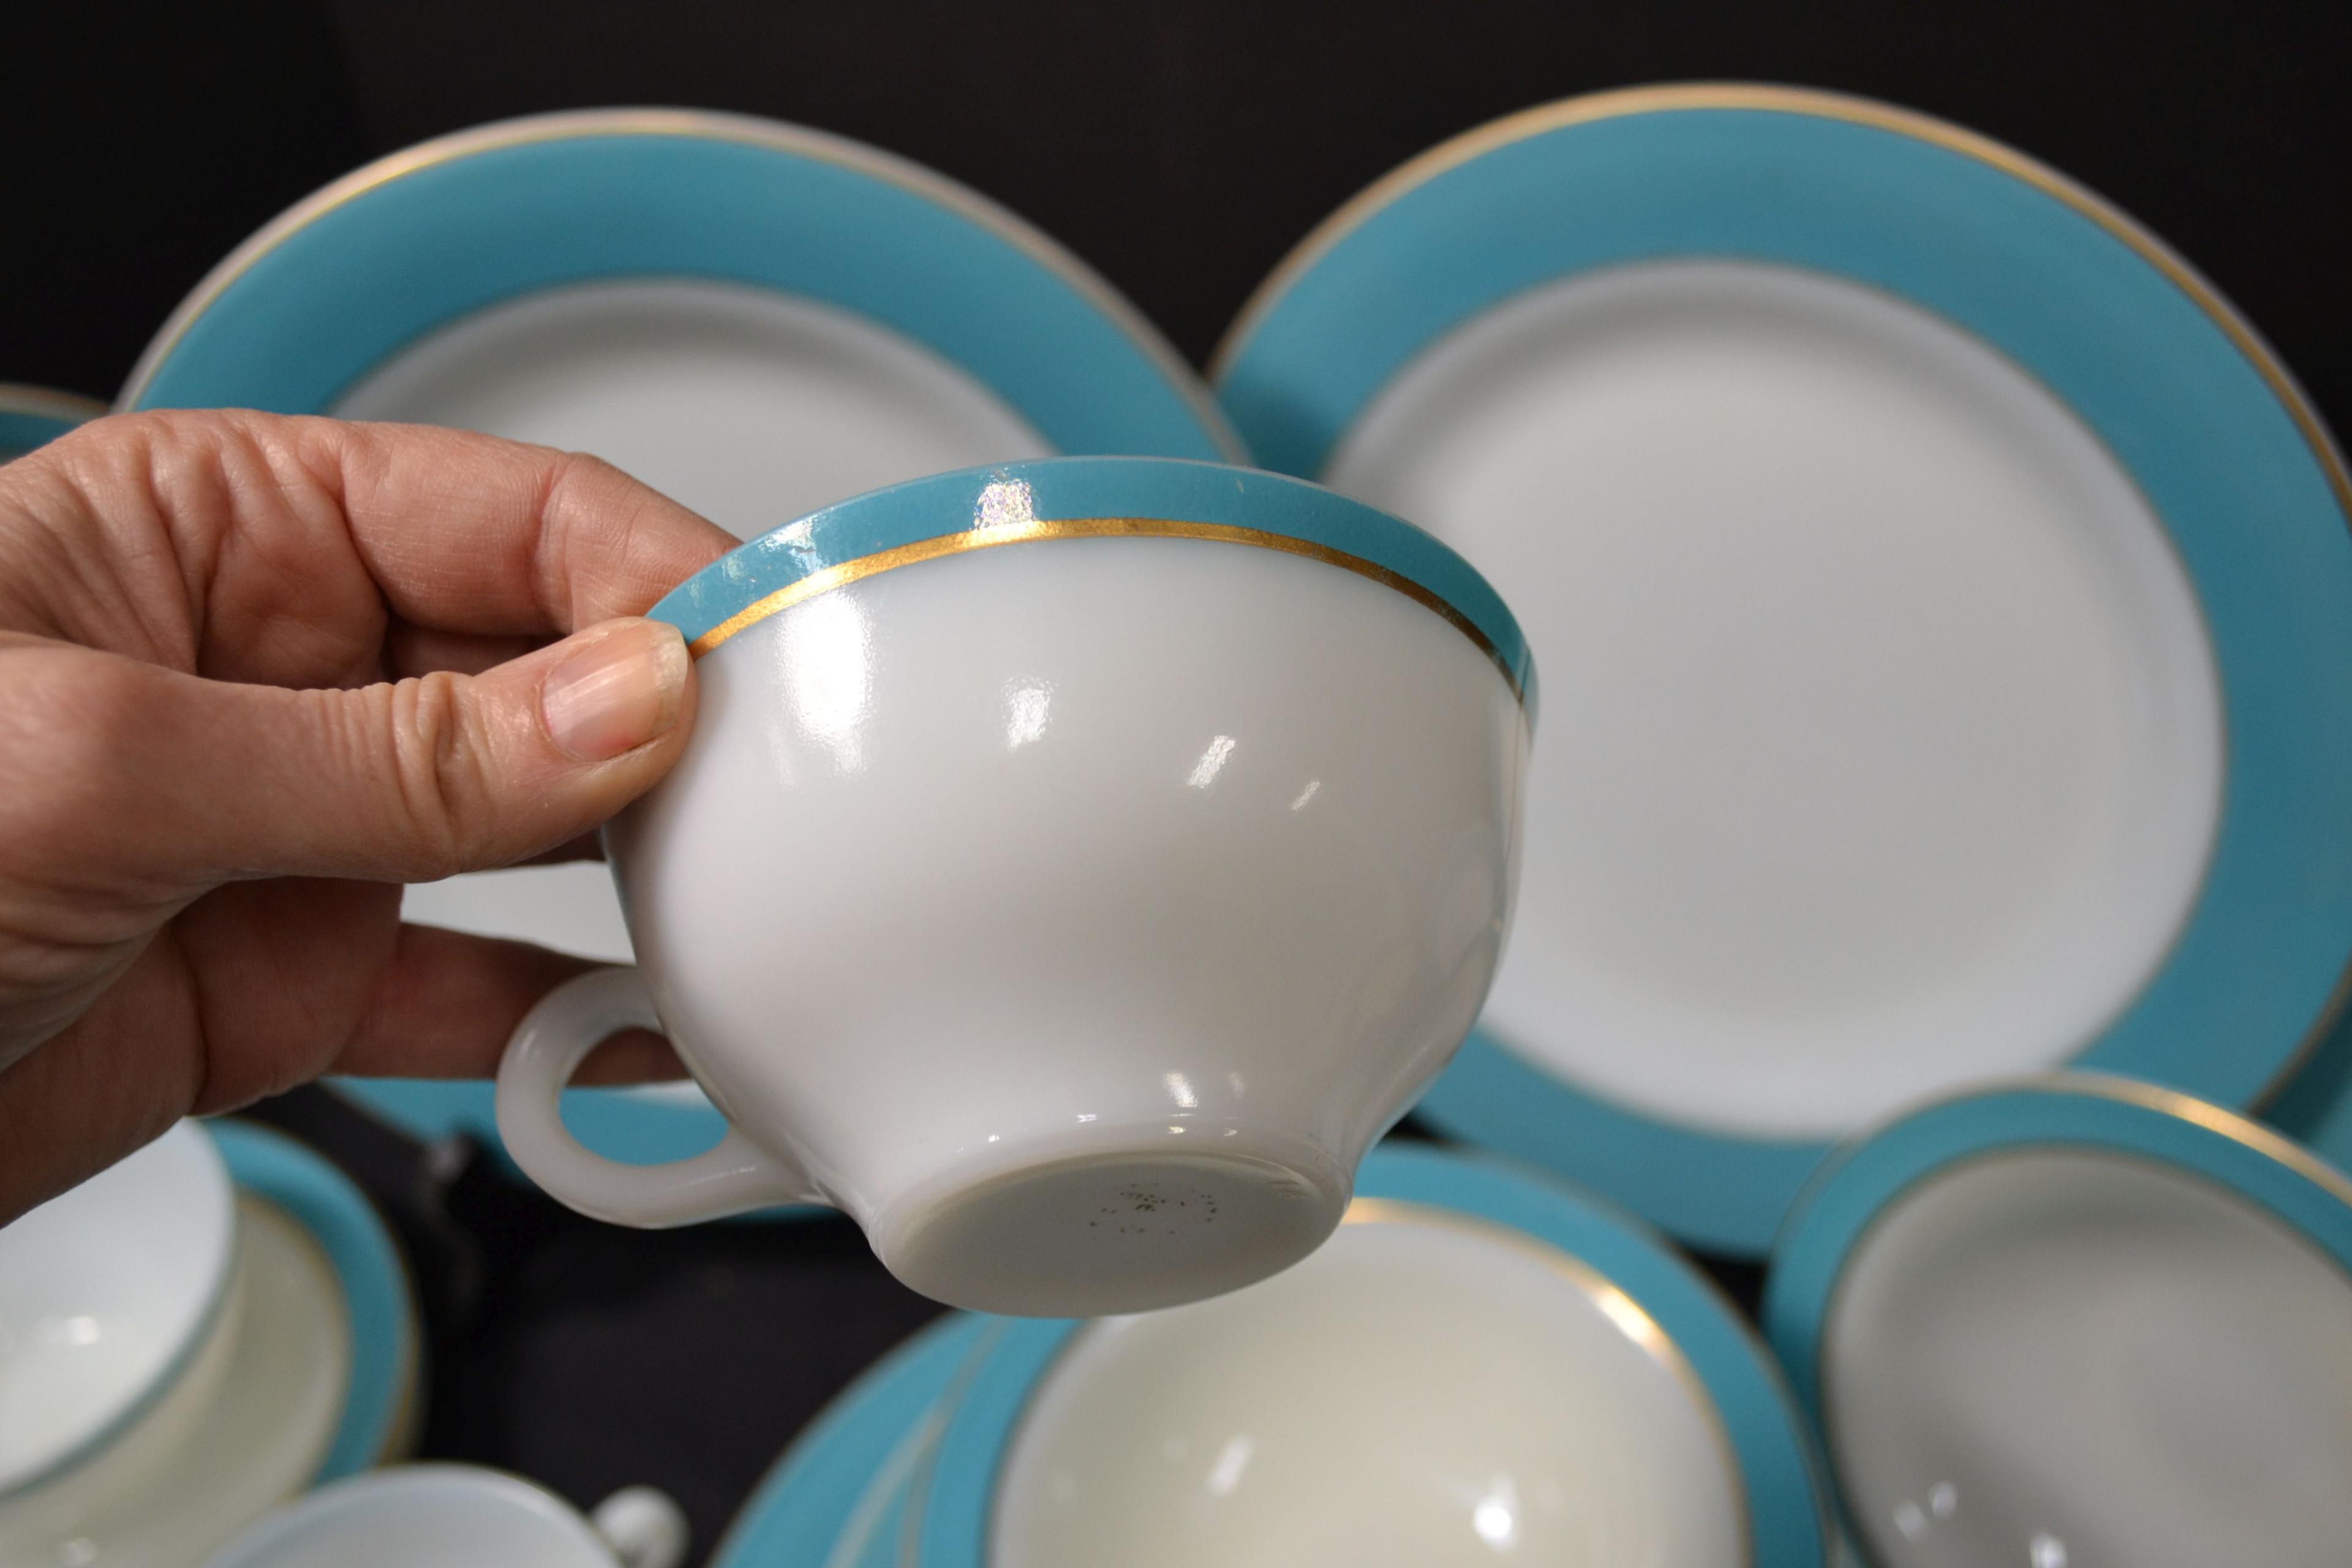 Pyrex 4 Place Setting Turquoise Dinnerware including 4 Dinner Plates, 4 Dessert Plates, 4 Bowls, 4 C